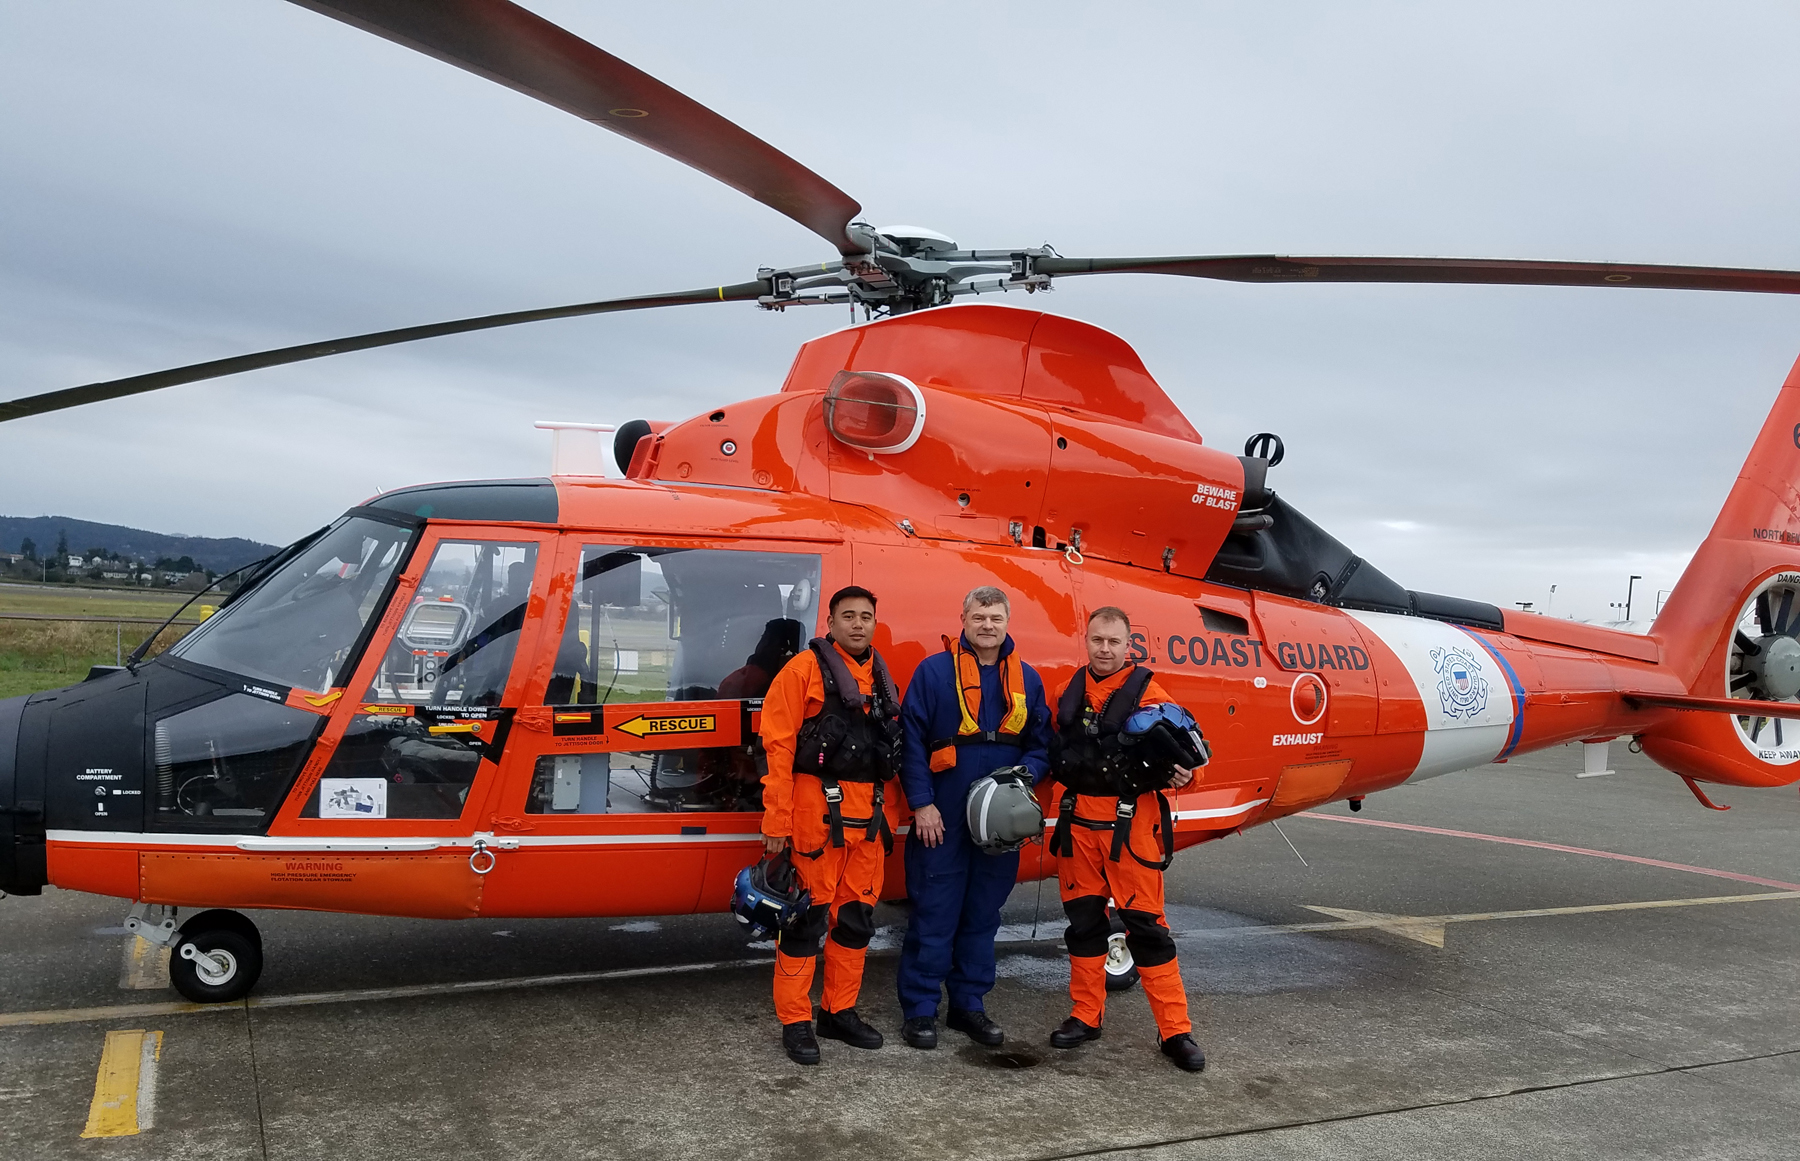 Coast Guard Helicopter To Stay In Newport | oregoncoastdailynews